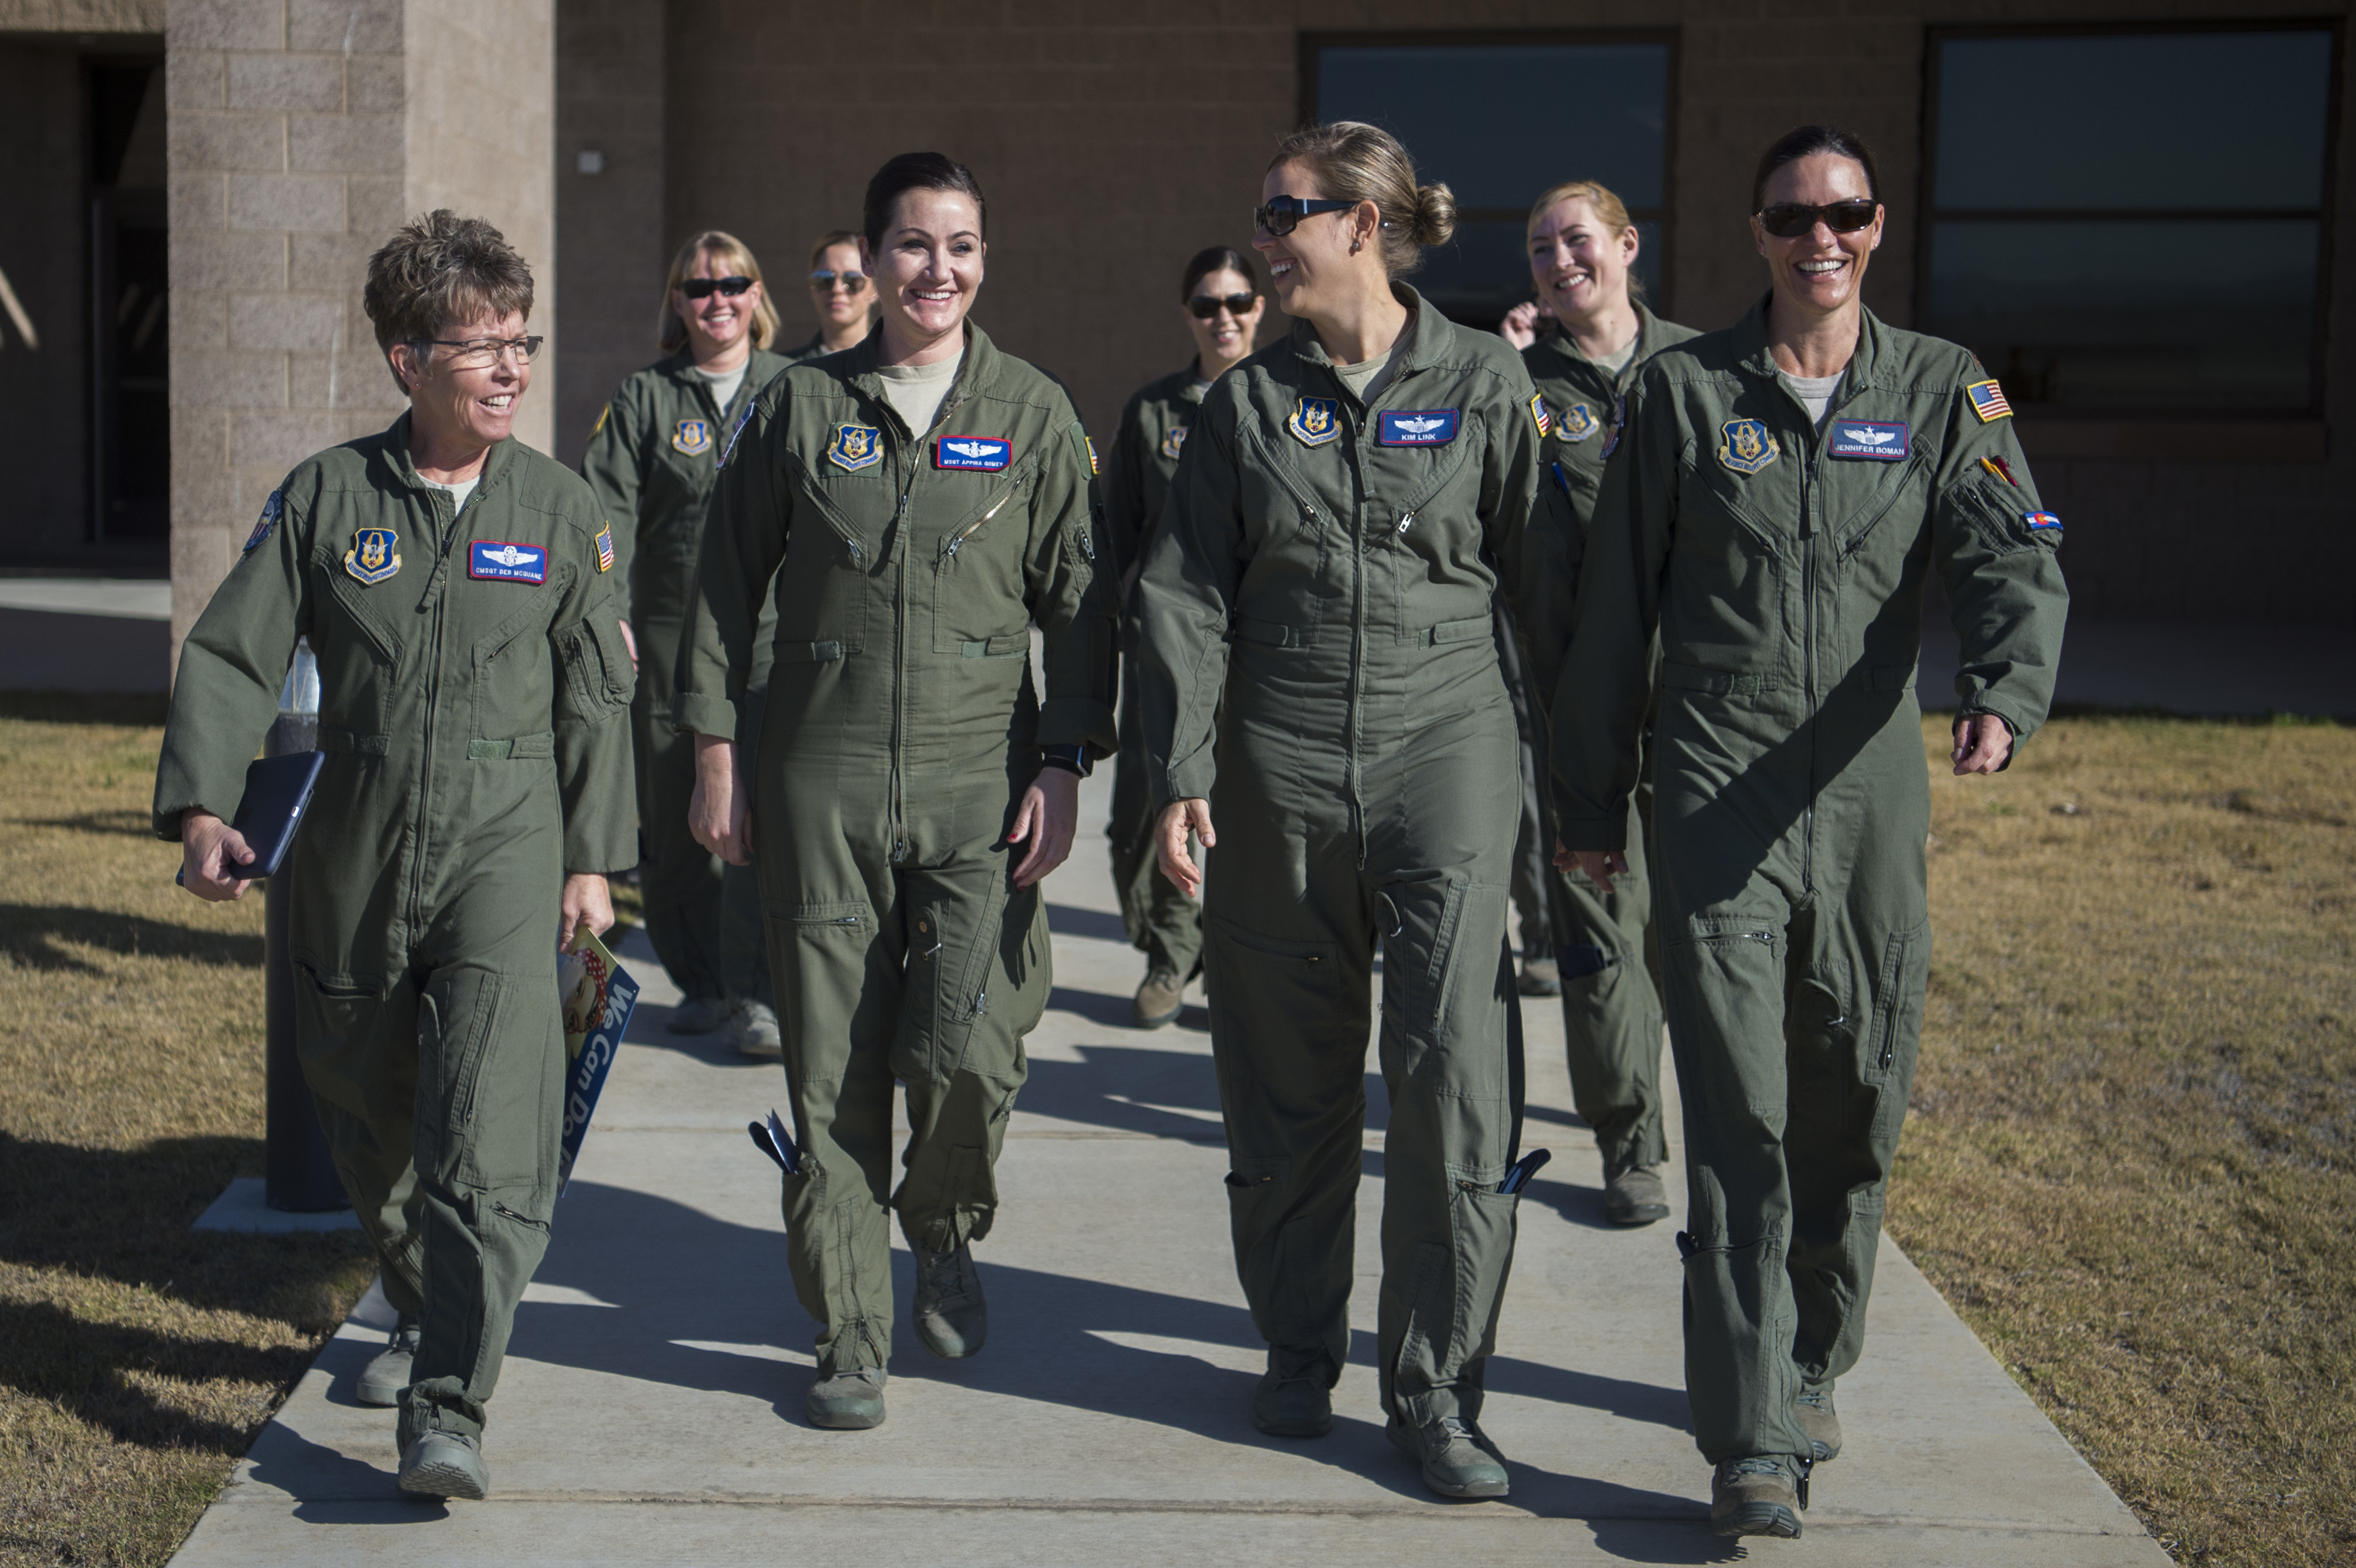 Women in the Air Force have pushed 